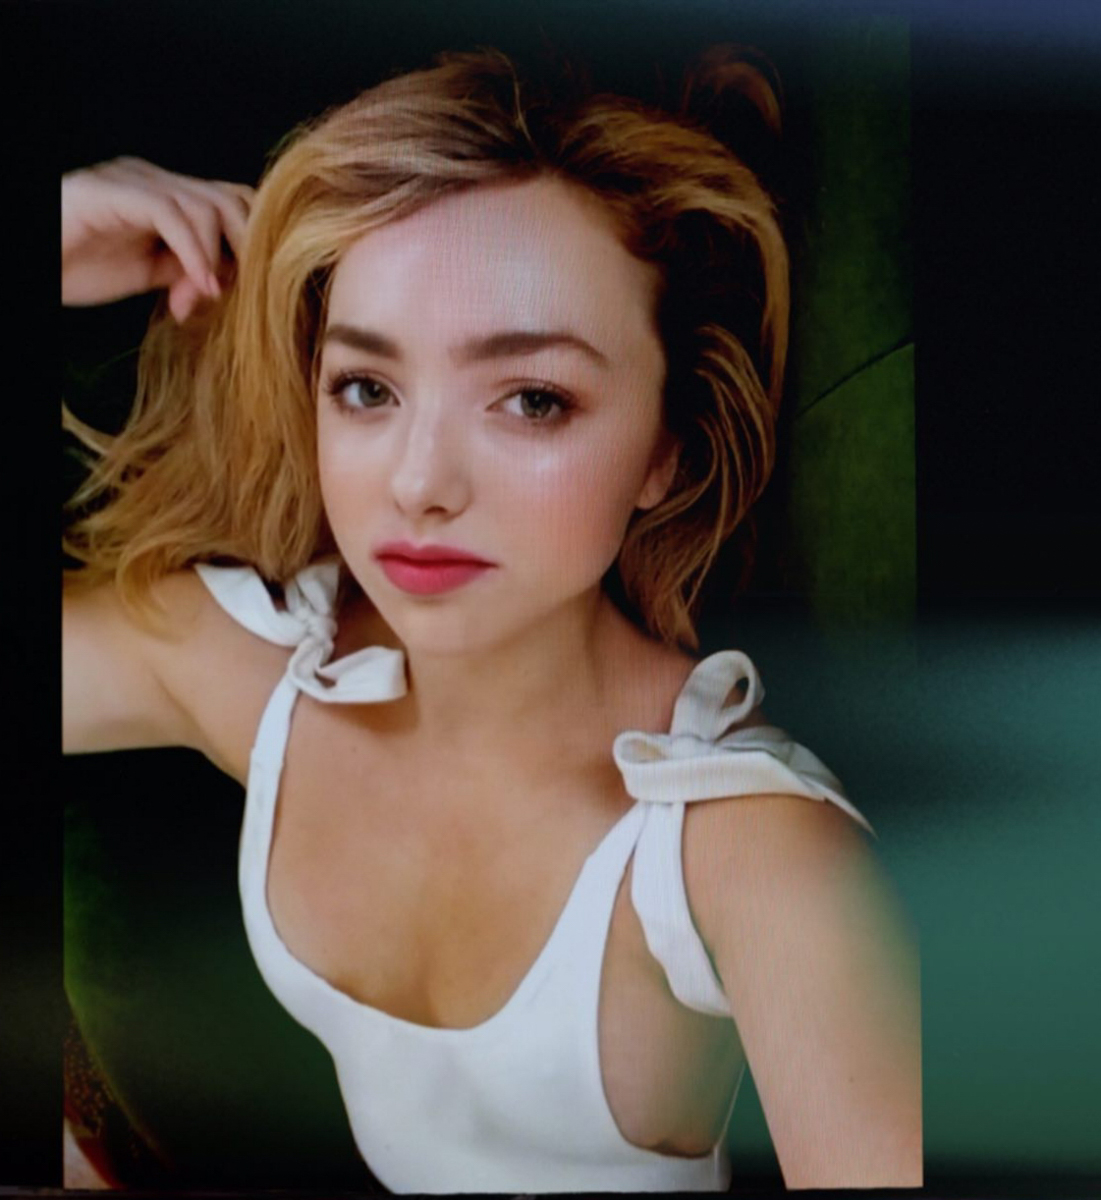 Photos n°4 : Peyton R List Busting Out of her Top!